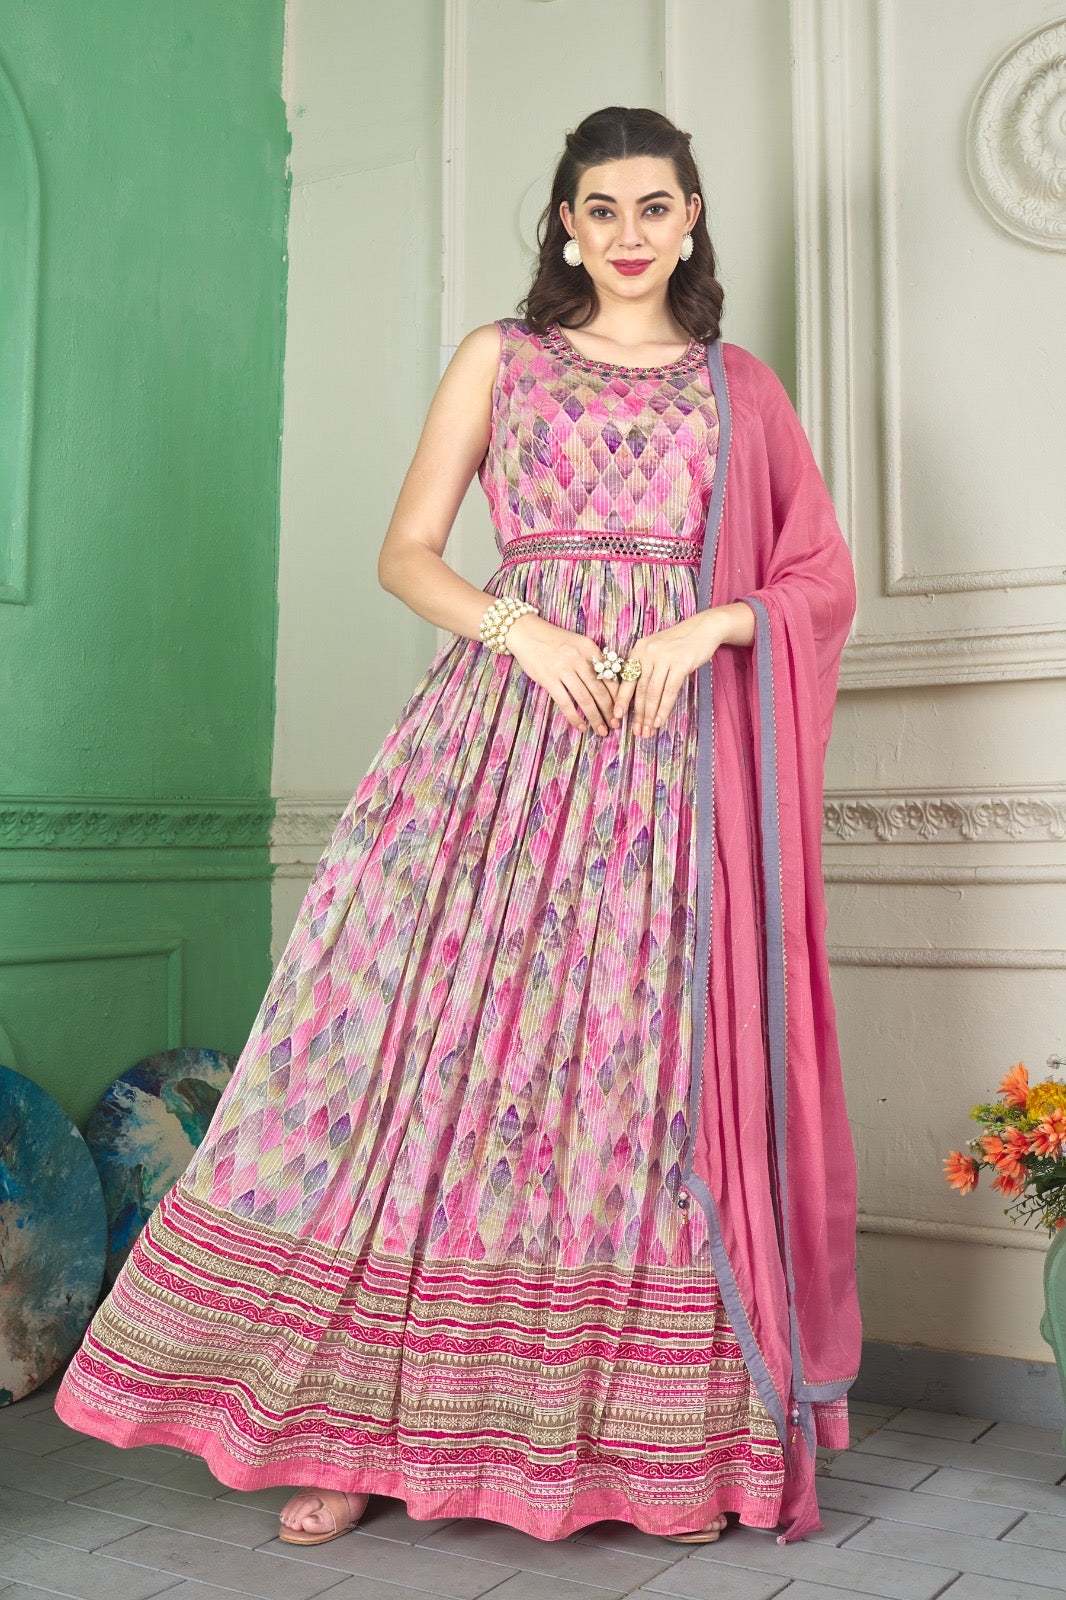 PINK - PARTY WEAR GOWN WITH NECK LINE HAND WORK & DUPATTA